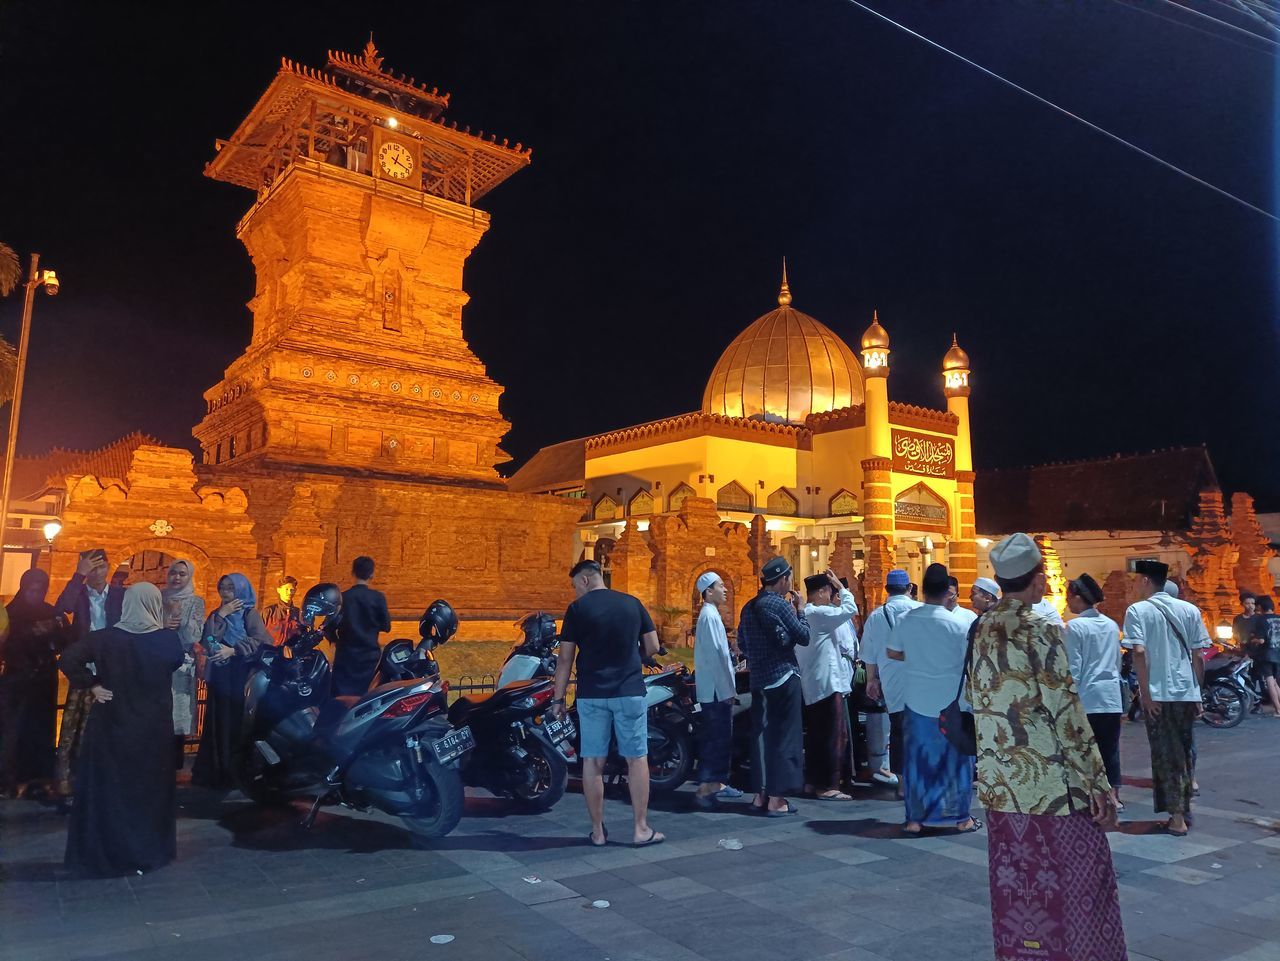 architecture, night, group of people, religion, travel destinations, crowd, large group of people, built structure, belief, building exterior, history, travel, city, the past, tourism, spirituality, temple - building, place of worship, illuminated, building, nature, tradition, men, ancient, temple, adult, street, sky, outdoors, tourist, evening